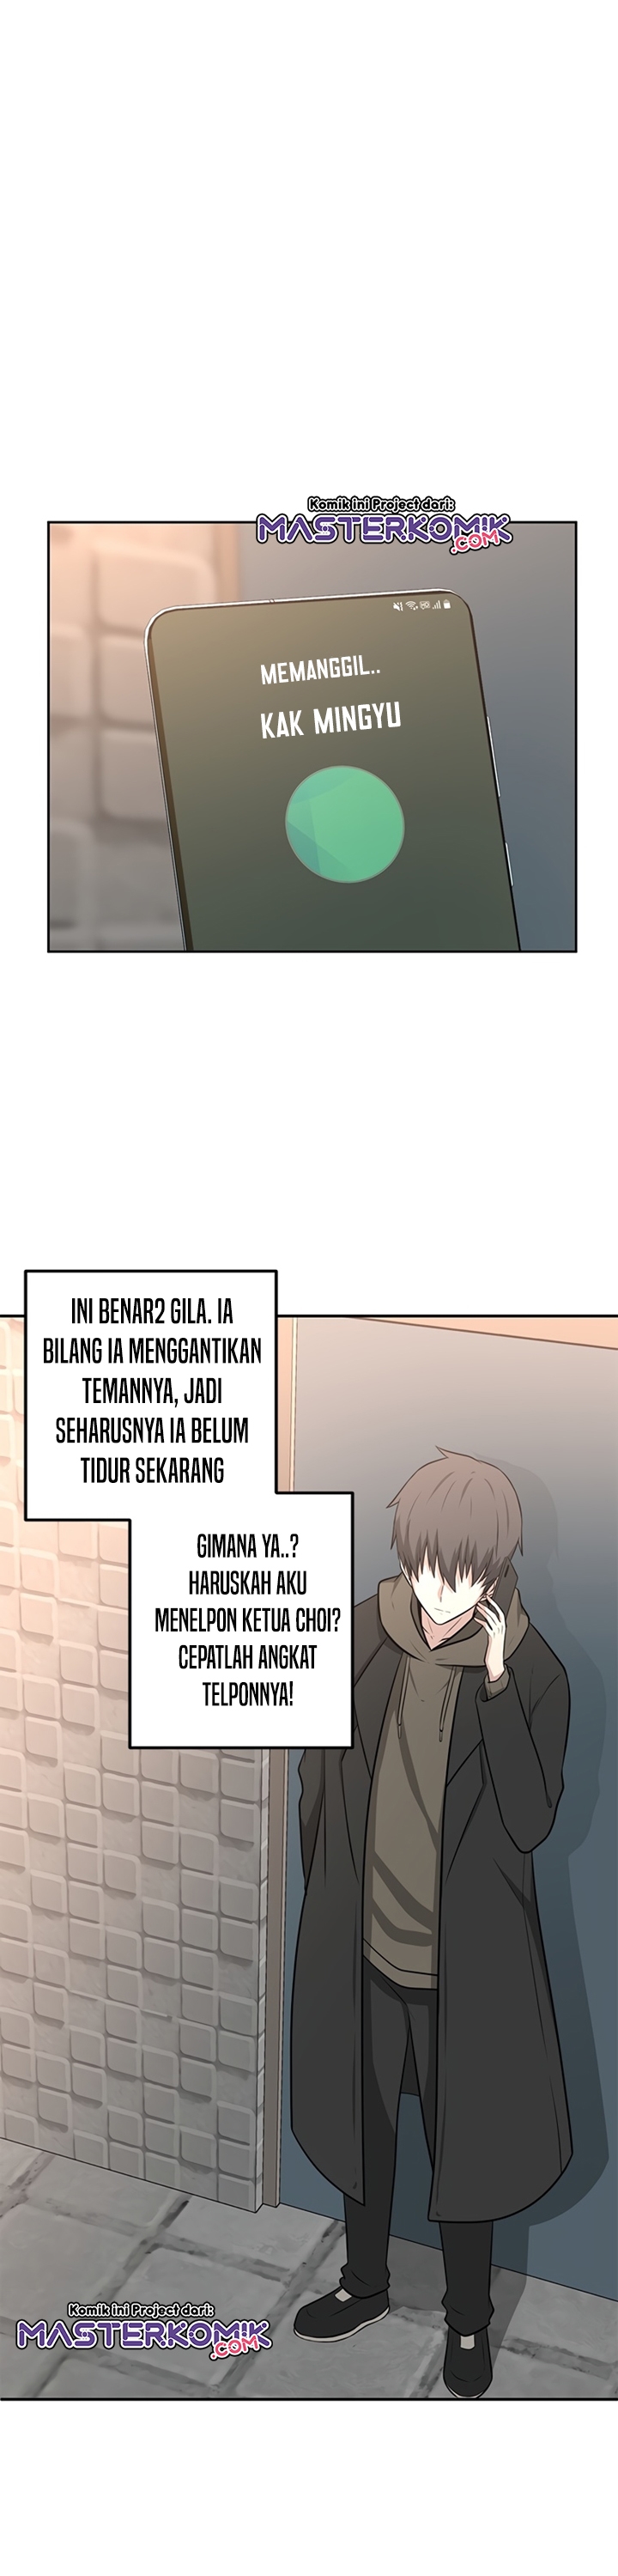 Where Are You Looking, Manager? Chapter 05